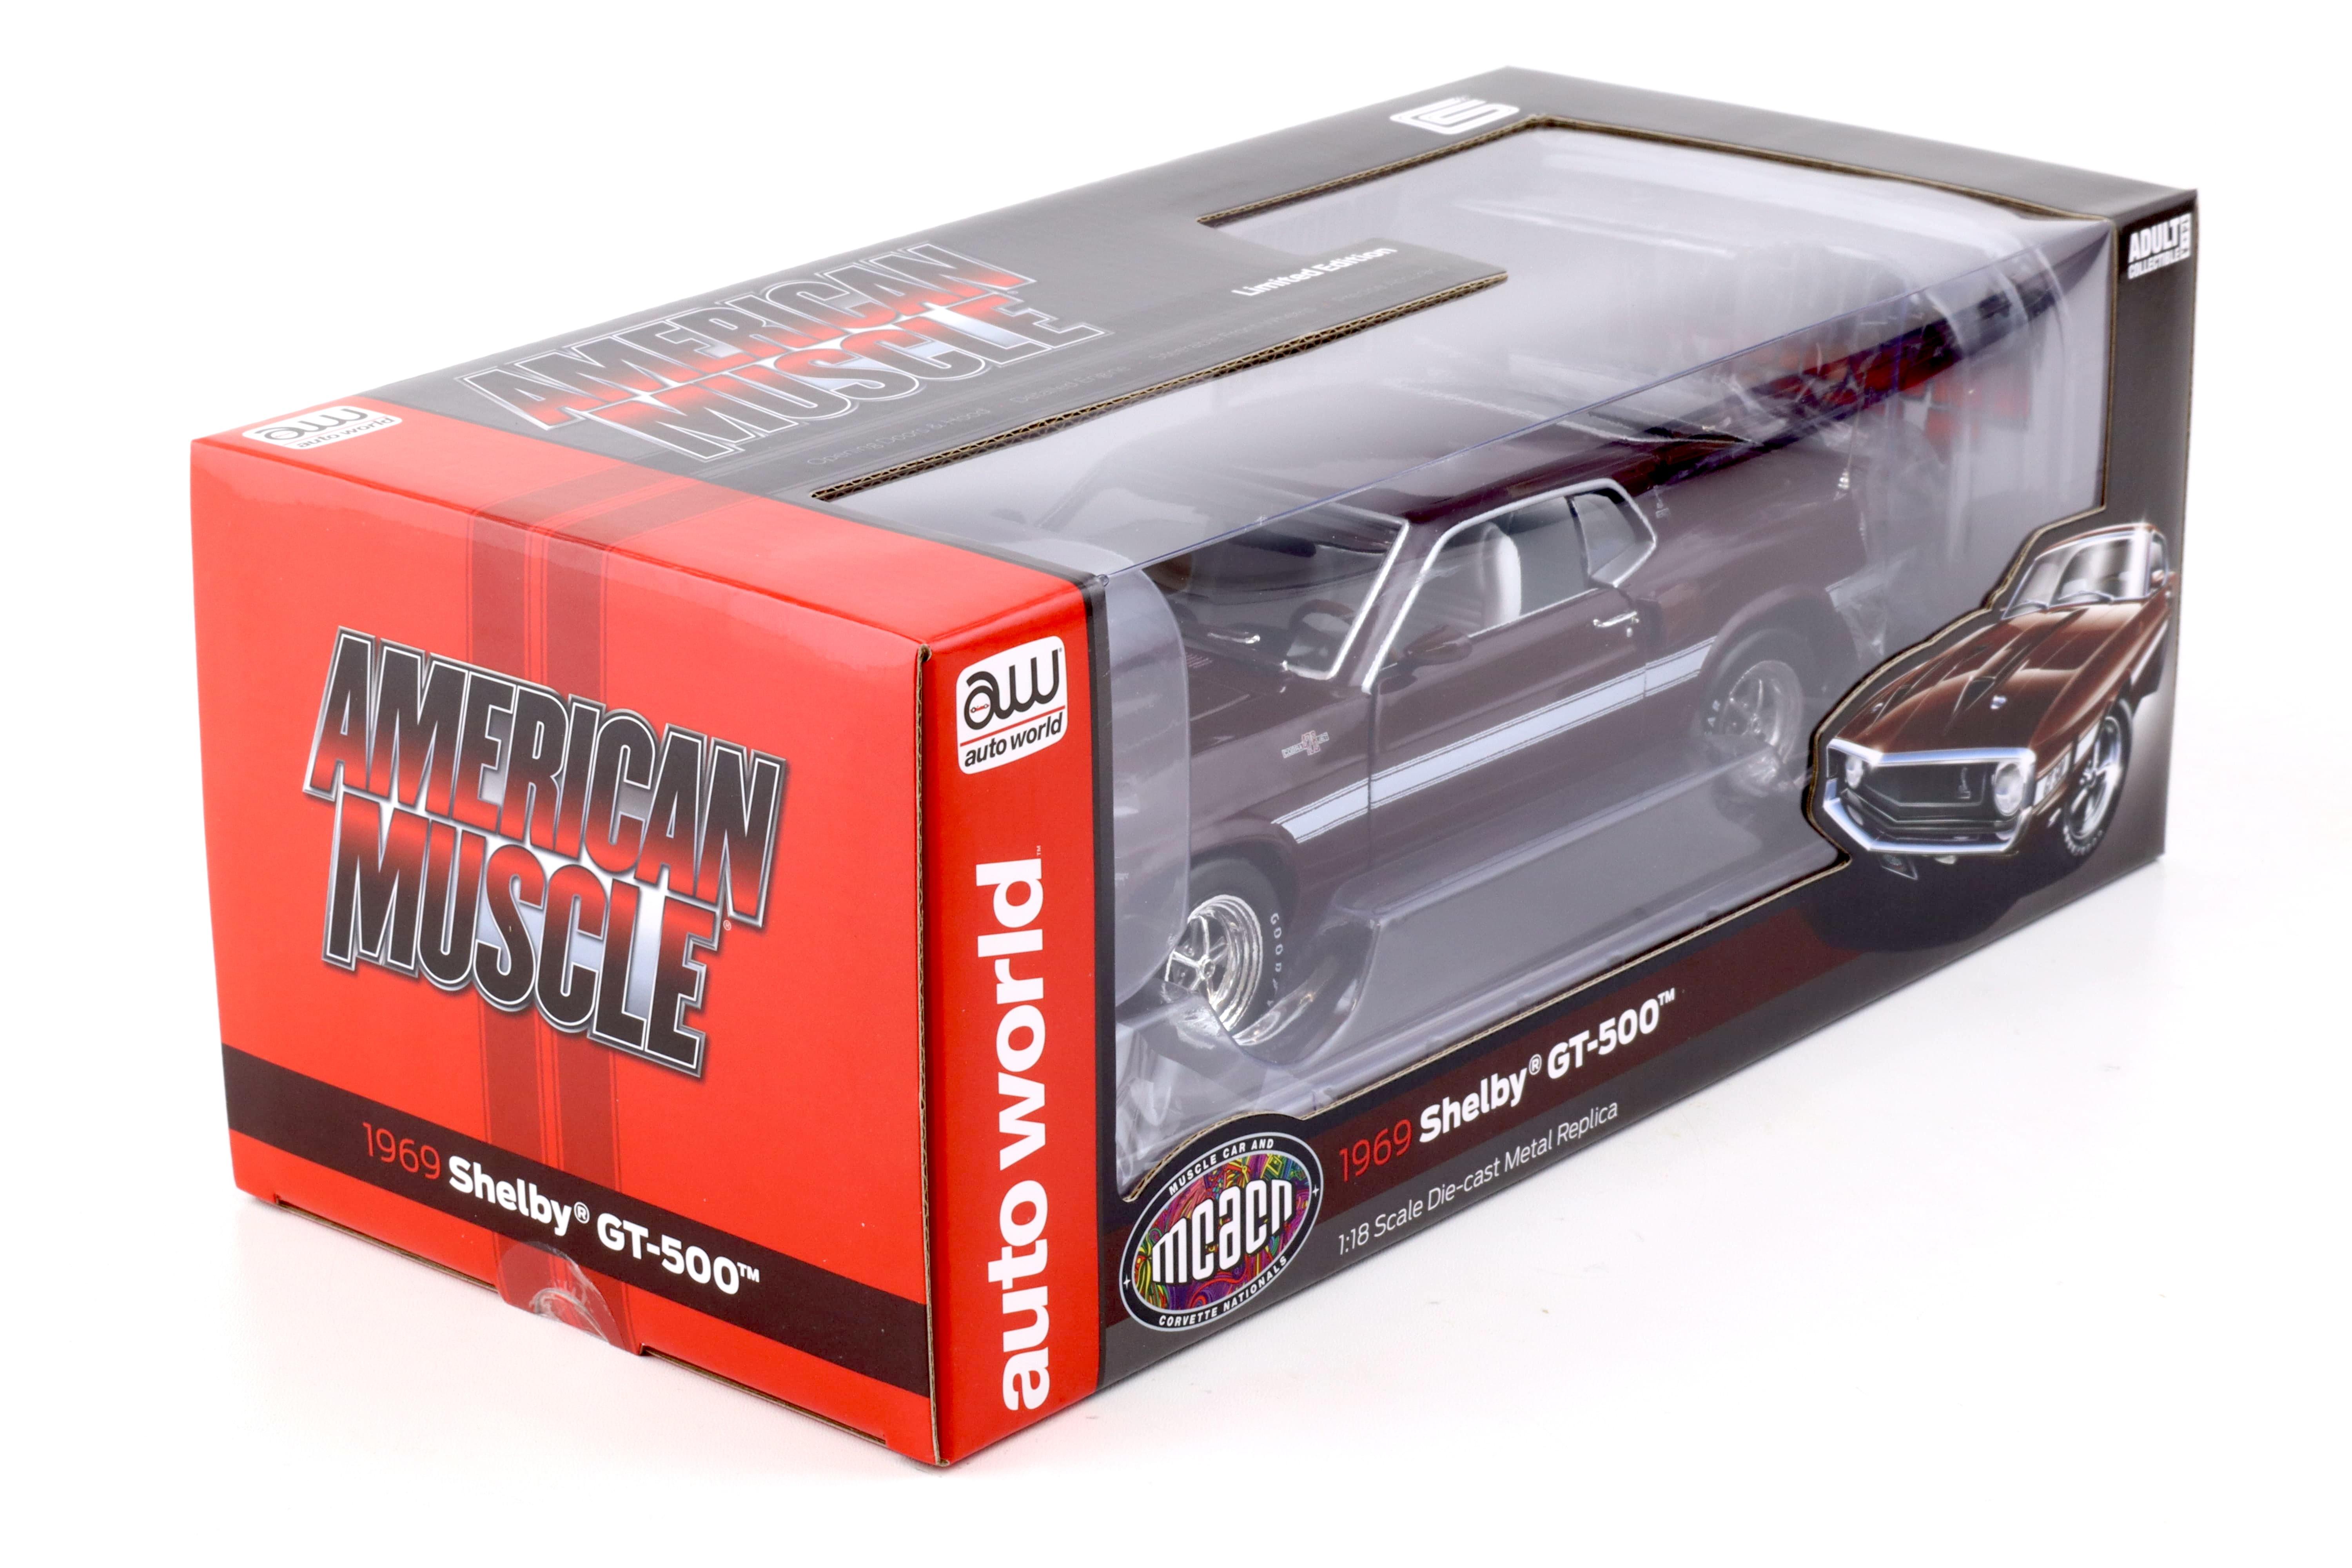 1:18 Auto World 1969 Shelby GT500 Mustang 2+2 Coupe MCACN Royal Maroon